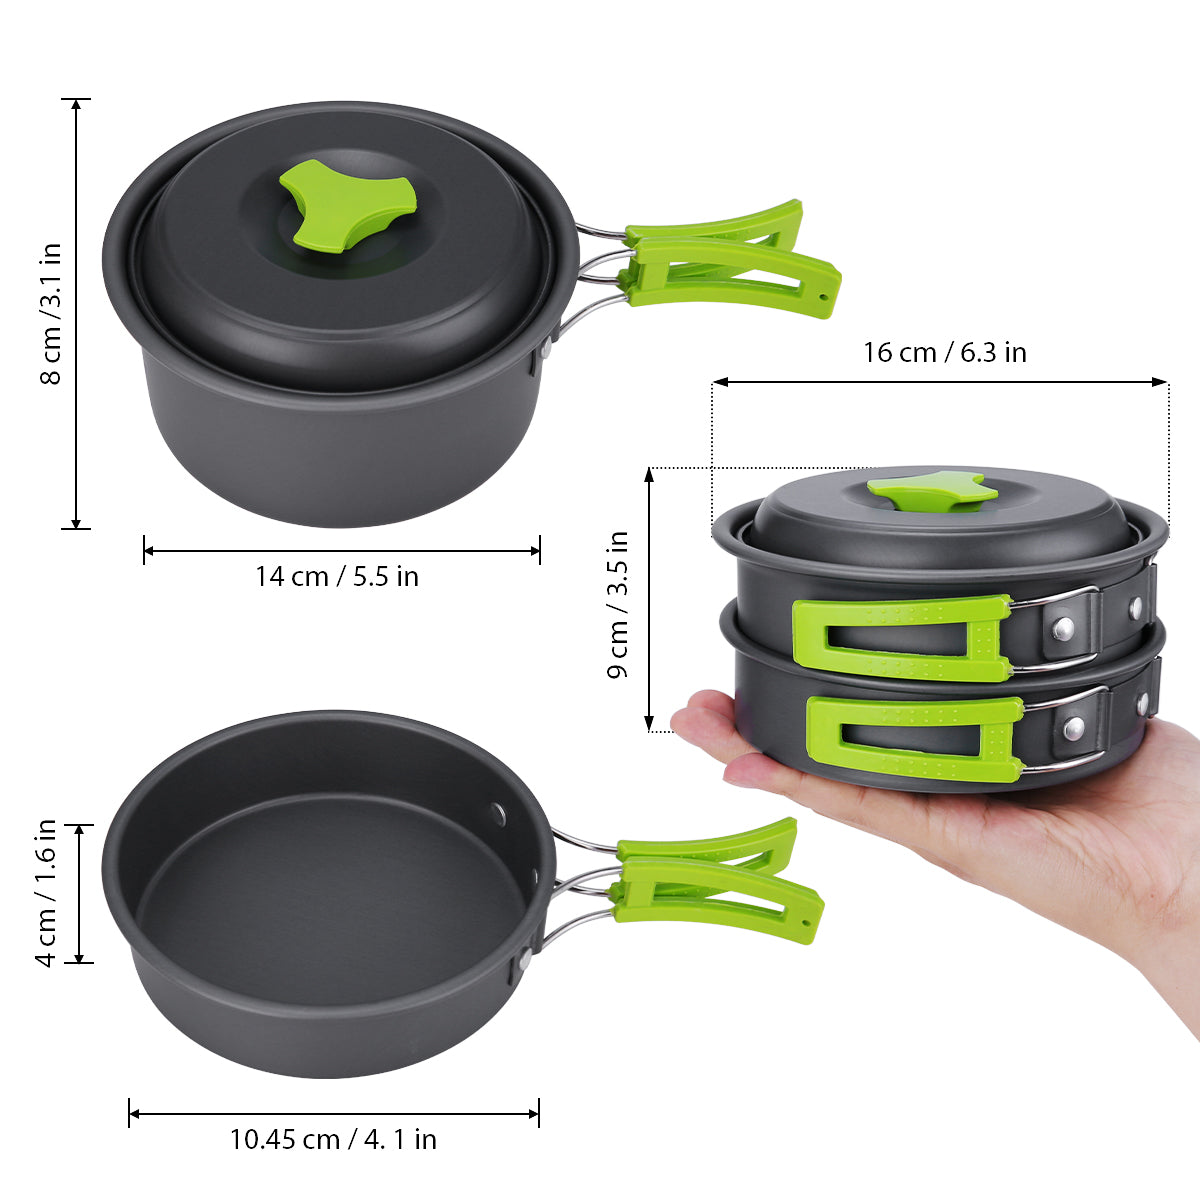 Camping Cookware, 15Pcs Backpacking Gear Hiking Outdoors Non Stick Camping Cookware Set 1-2 People Lightweight Compact Durable Pot Pan Bowls